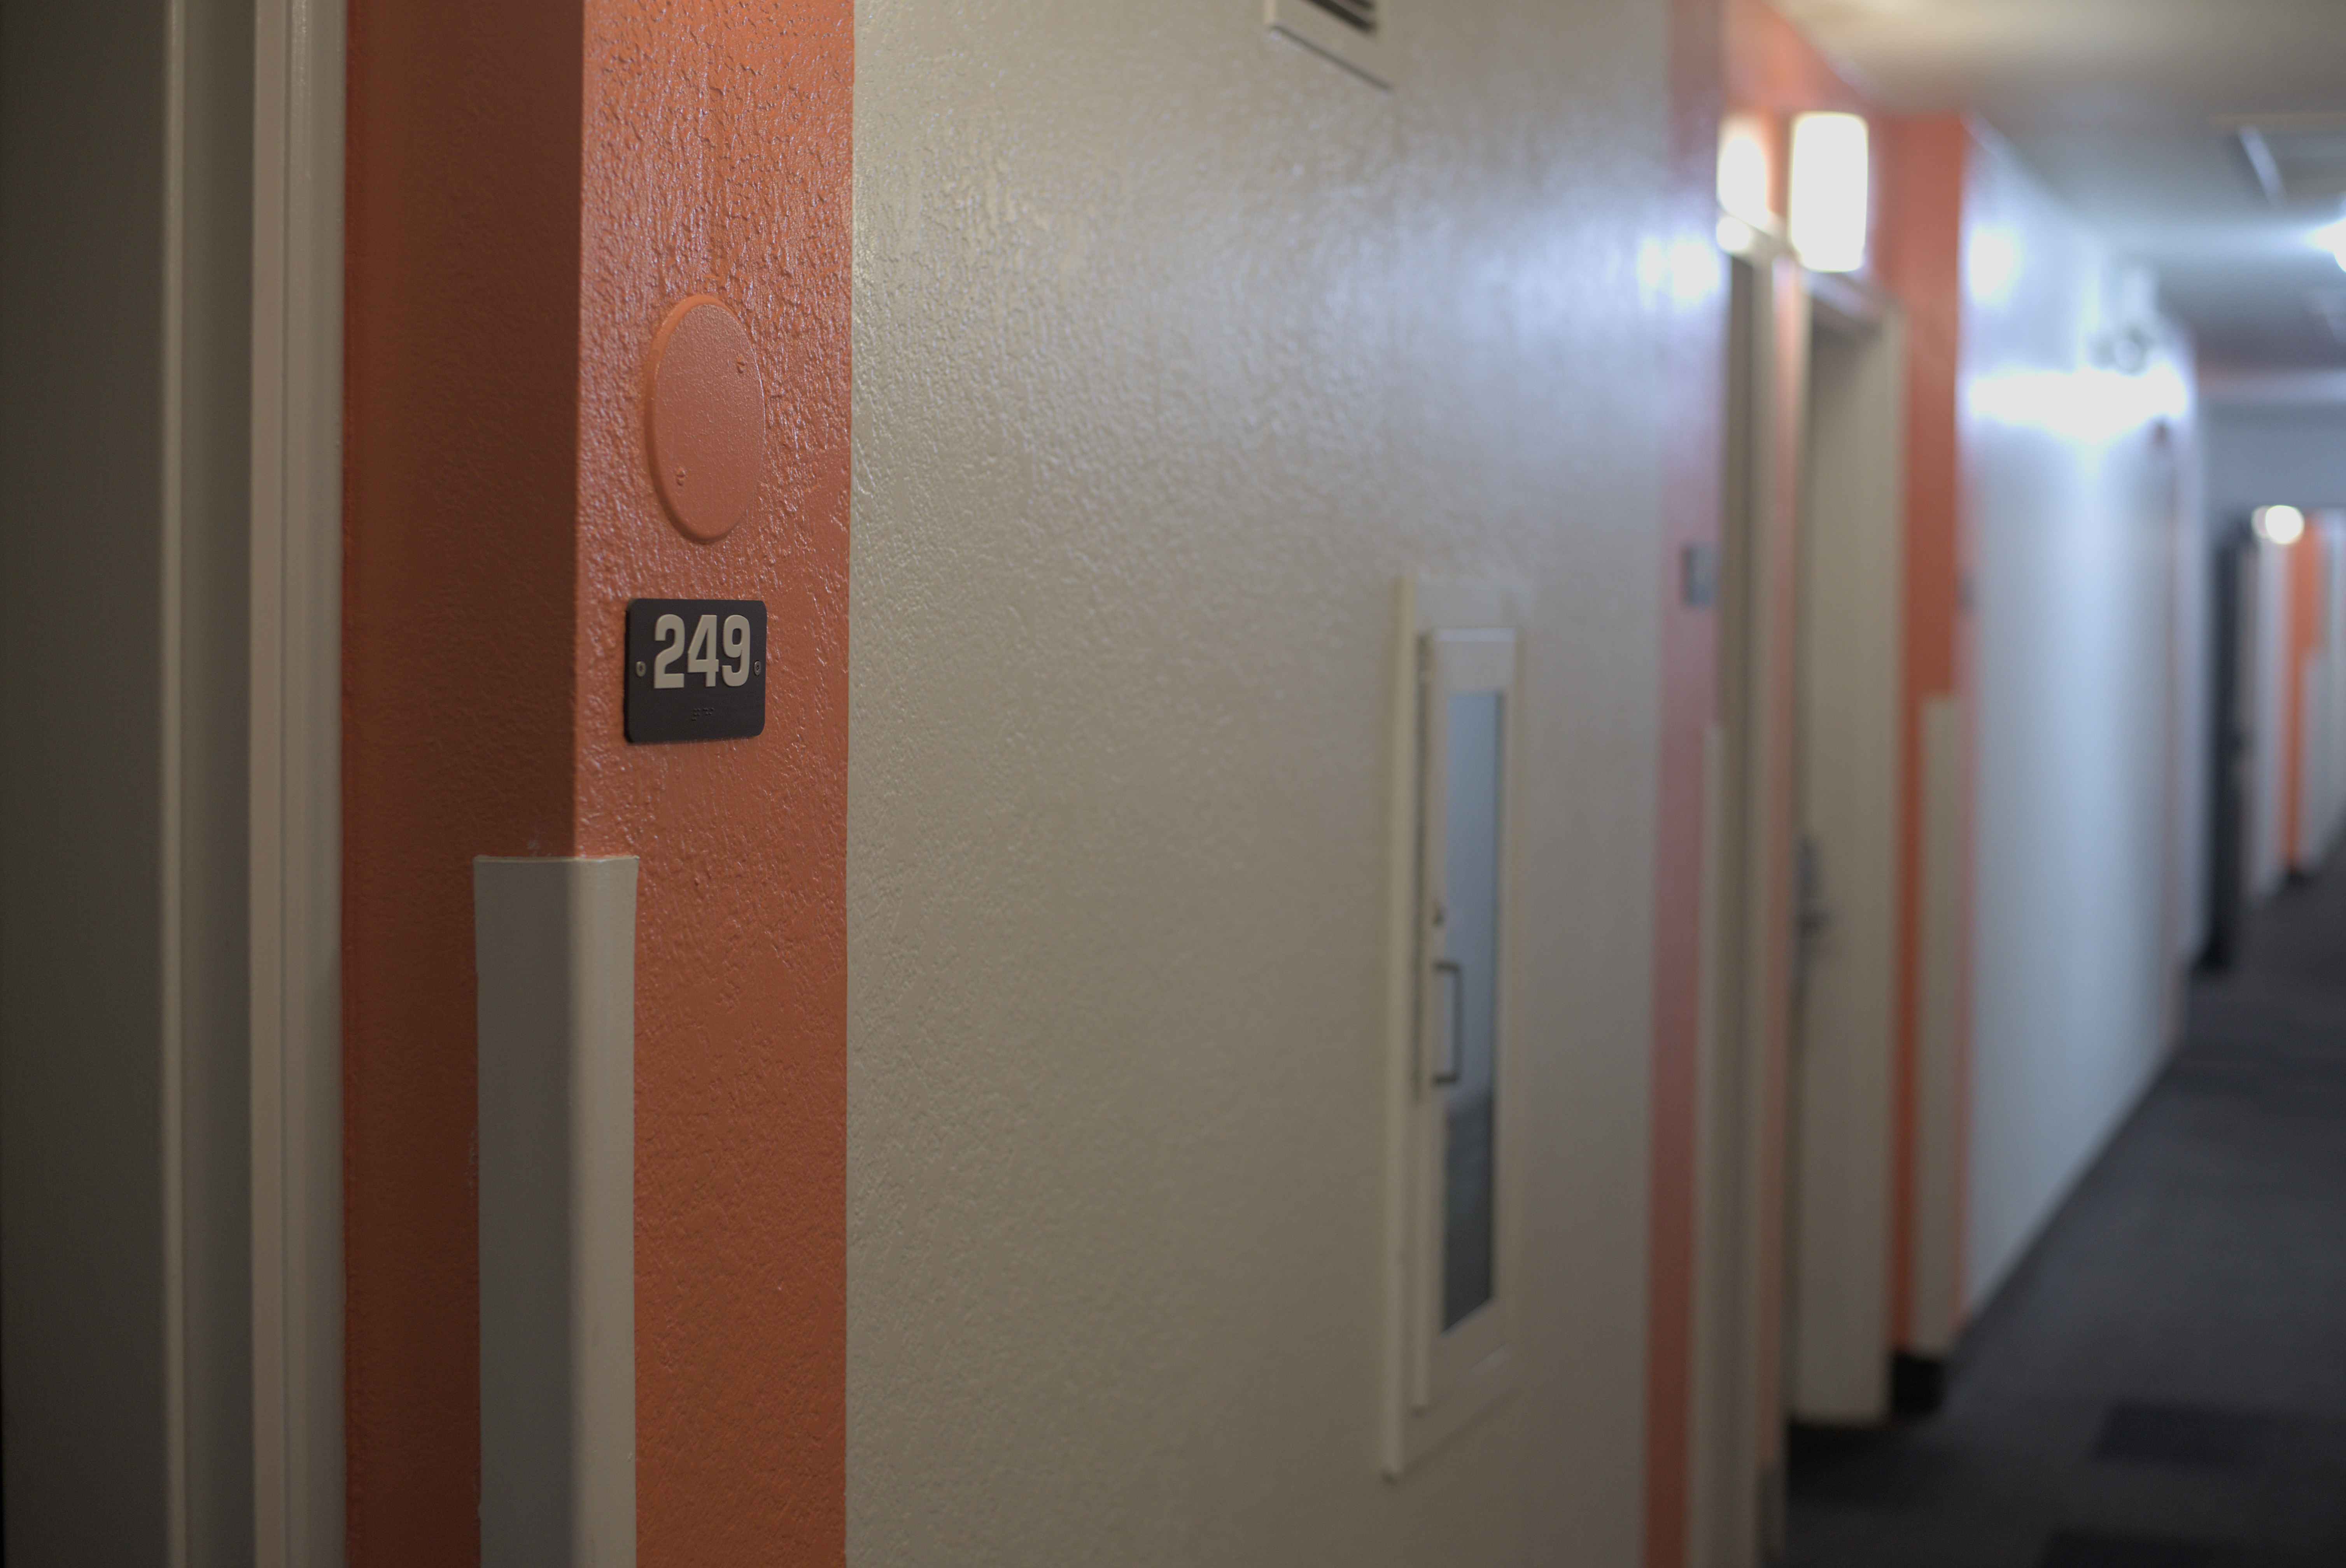 Nearly 80 people are currently staying at the Newport Motel 6, which includes single adults, couples, and several families with young children.